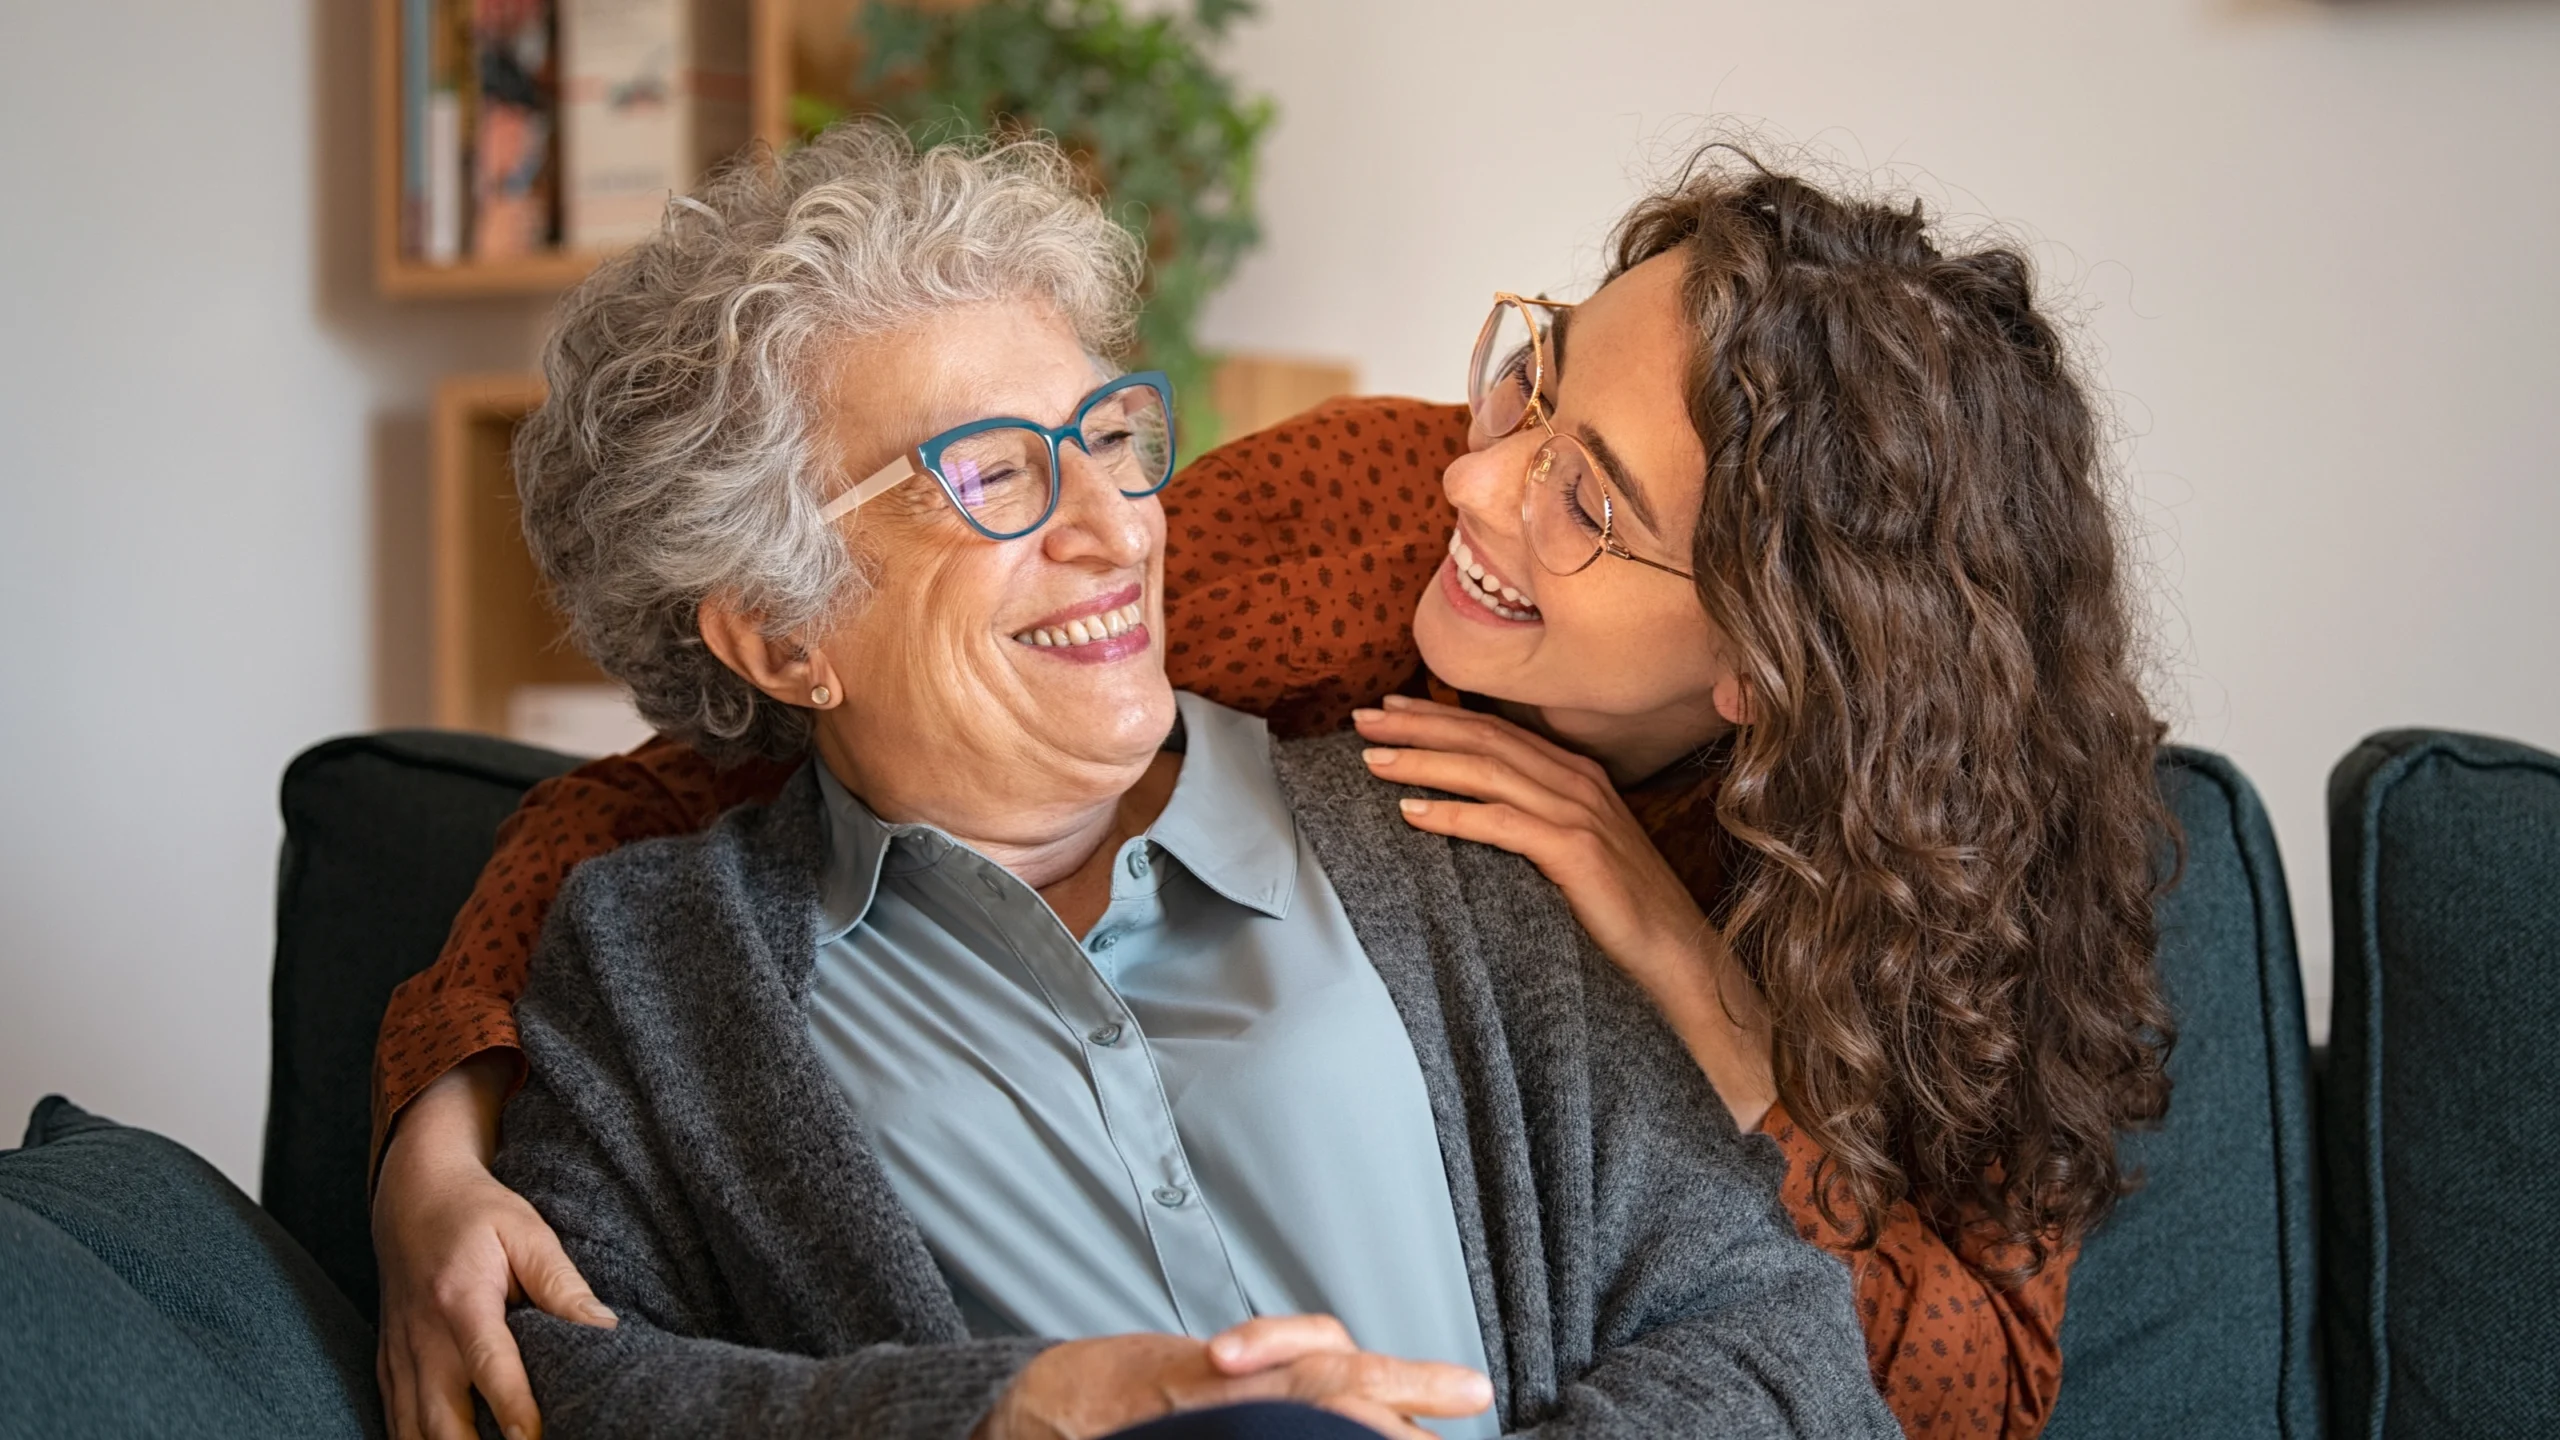 Designing a site that shifts the narrative on caregiving